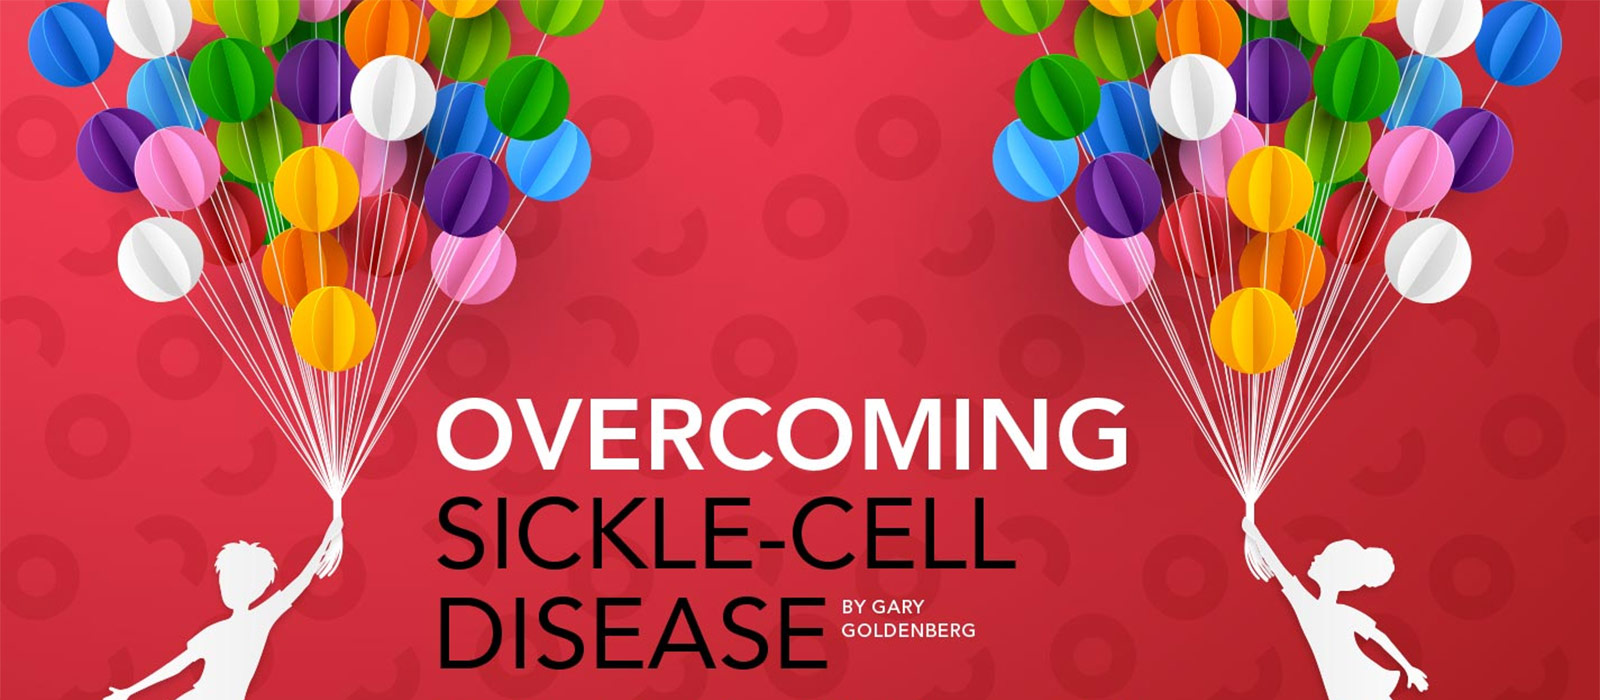 Overcoming Sickle-cell Disease